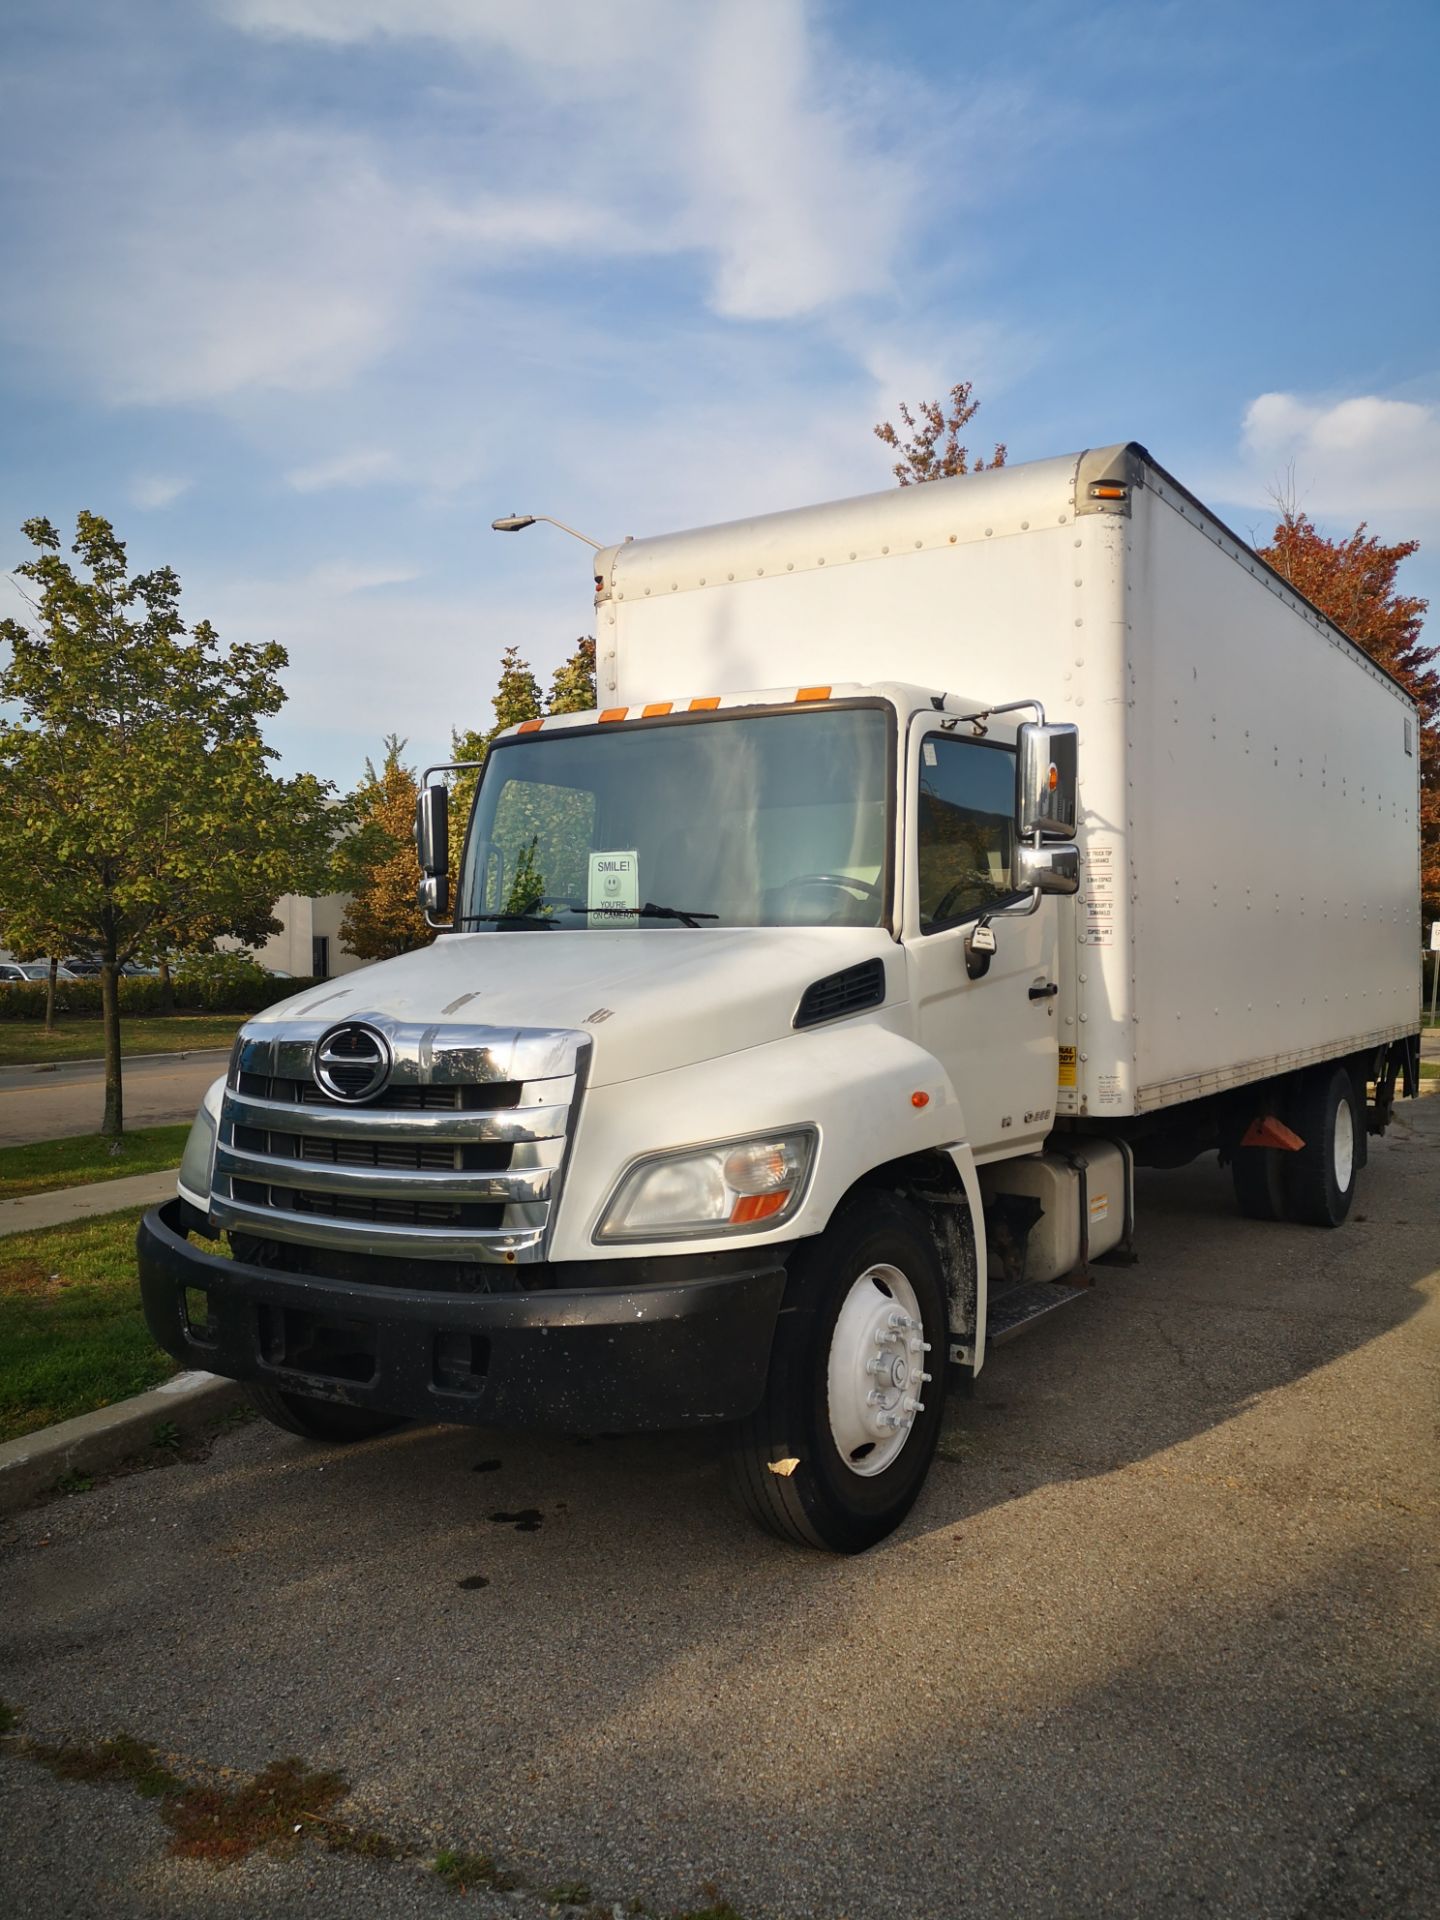 HINO, 268, 24', BOX TRUCK WITH CENTRAL TRUCK BODY, ALLISON, 6-SPEED, AUTOMATIC TRANSMISSION, 3,000